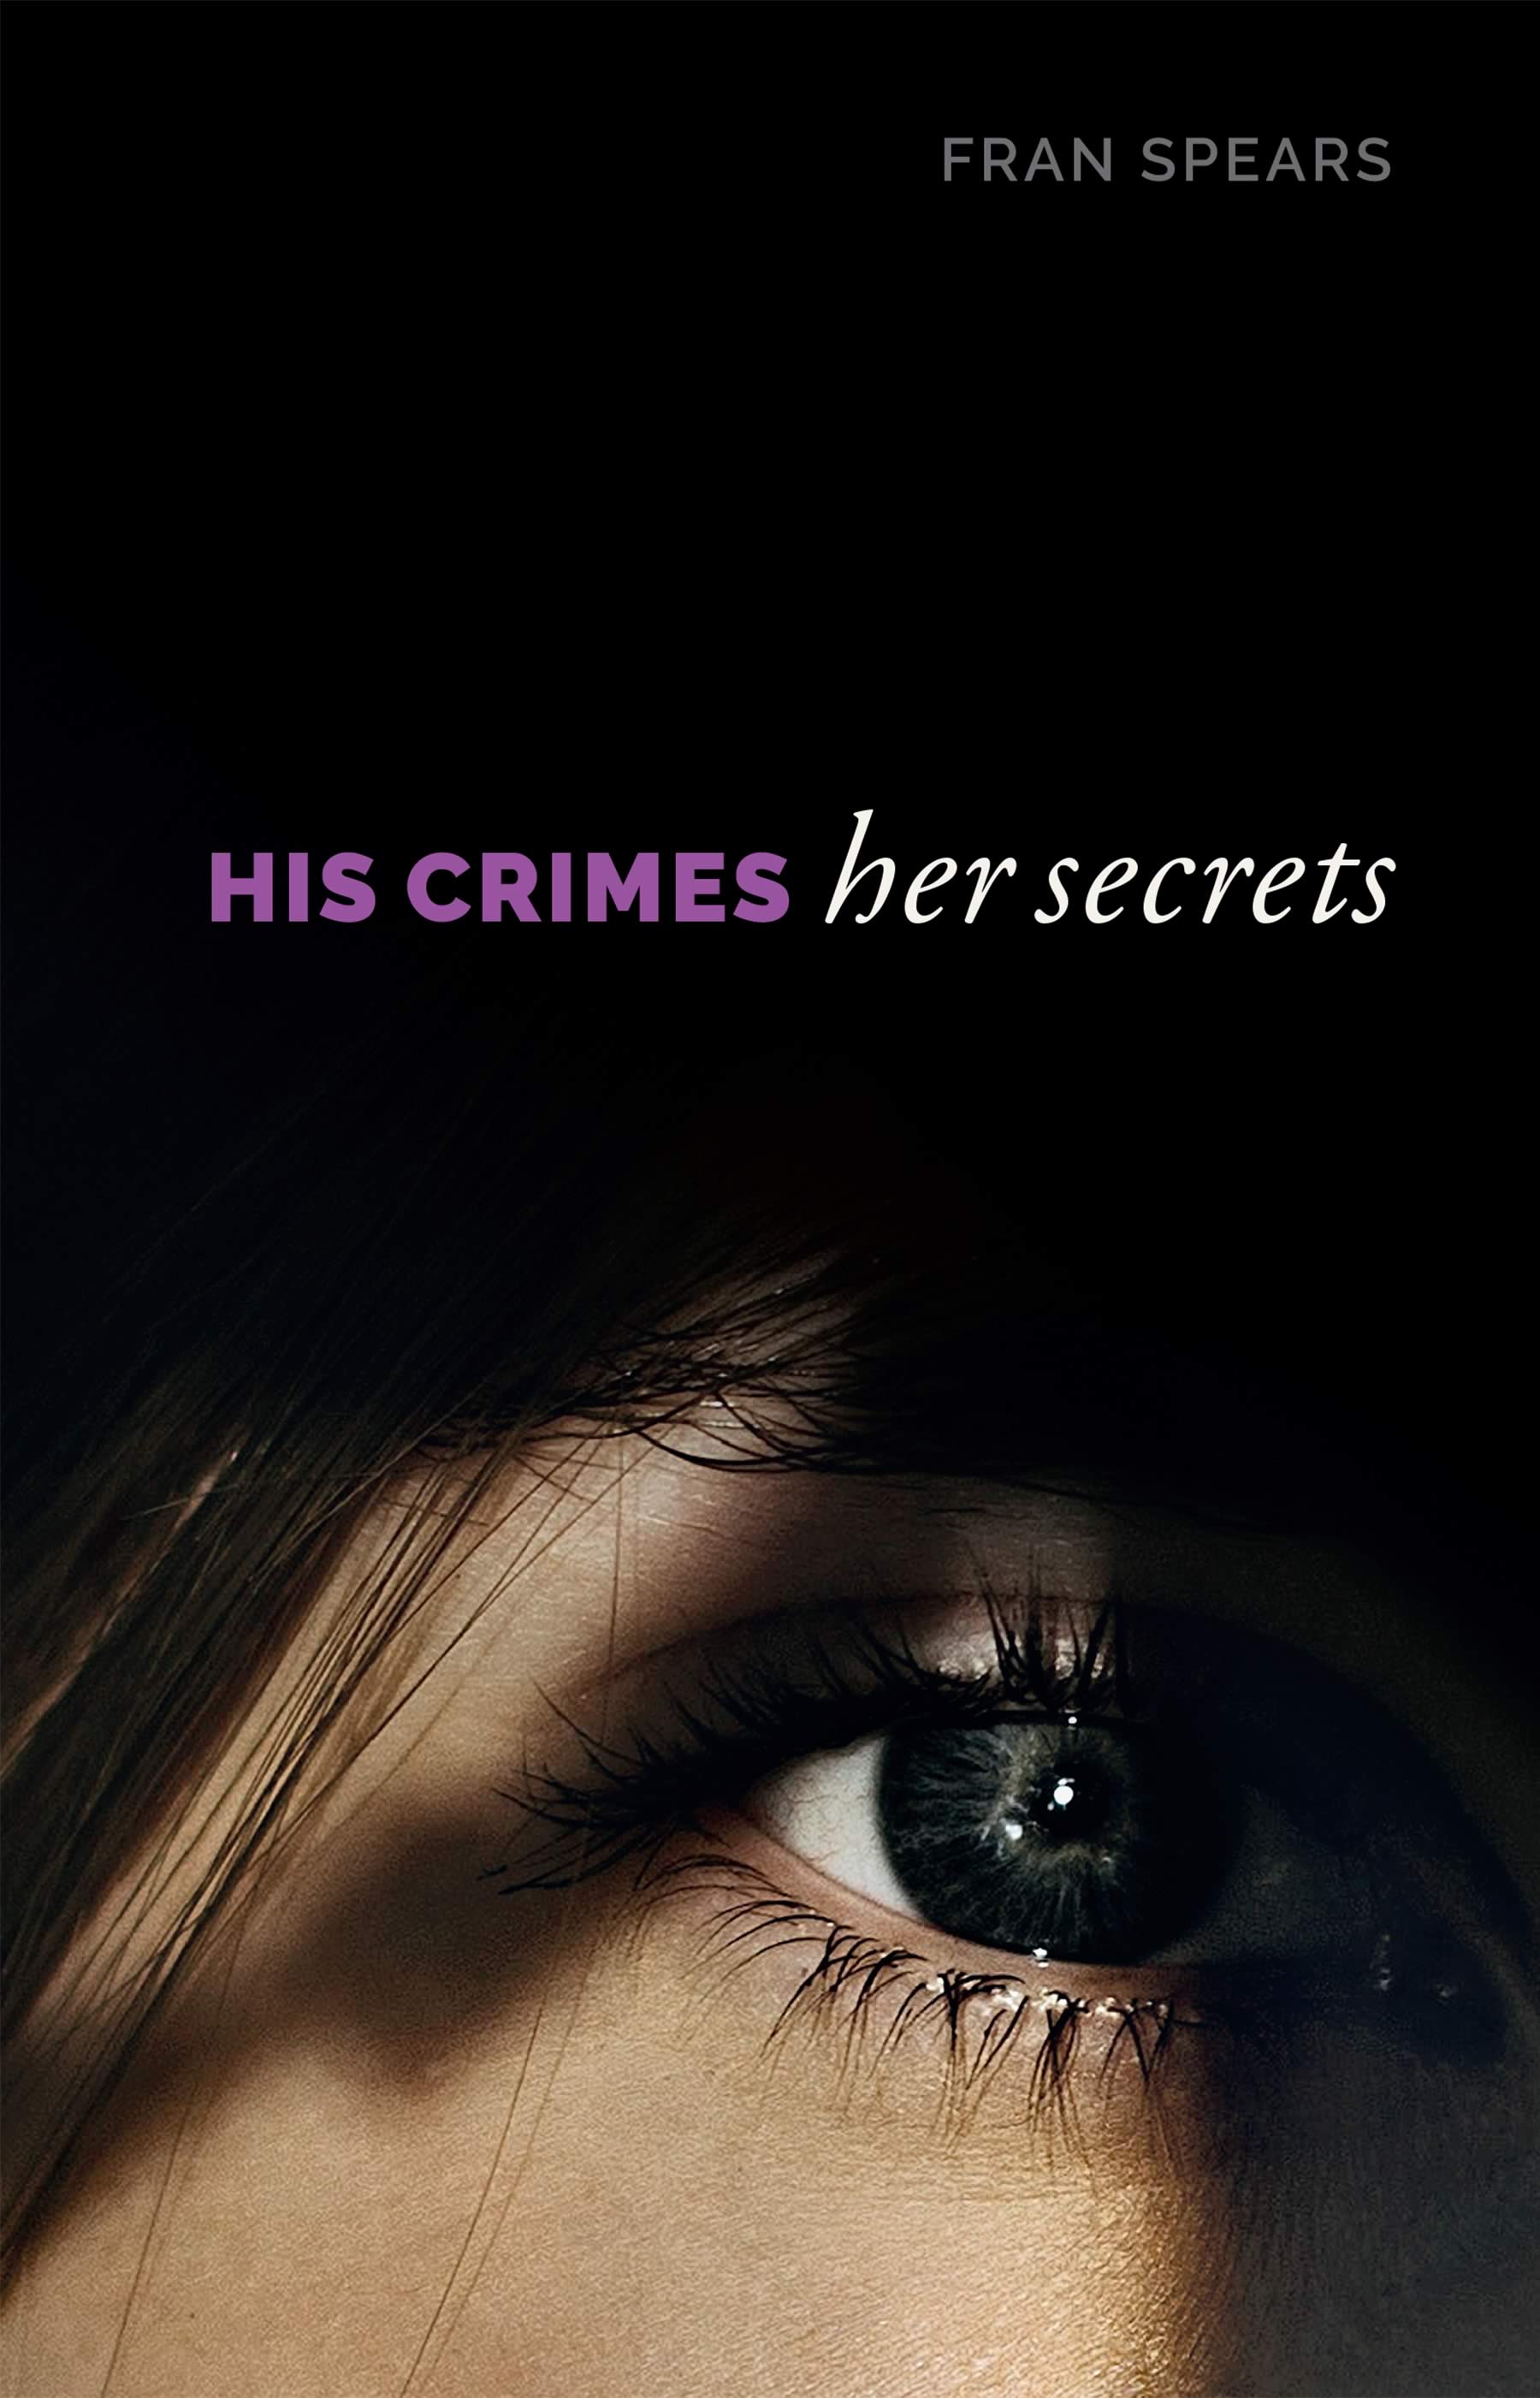 Image of the cover of the book His Crimes Her Secrets by Fran Spears showing a close up of a woman’s eye on a black background.